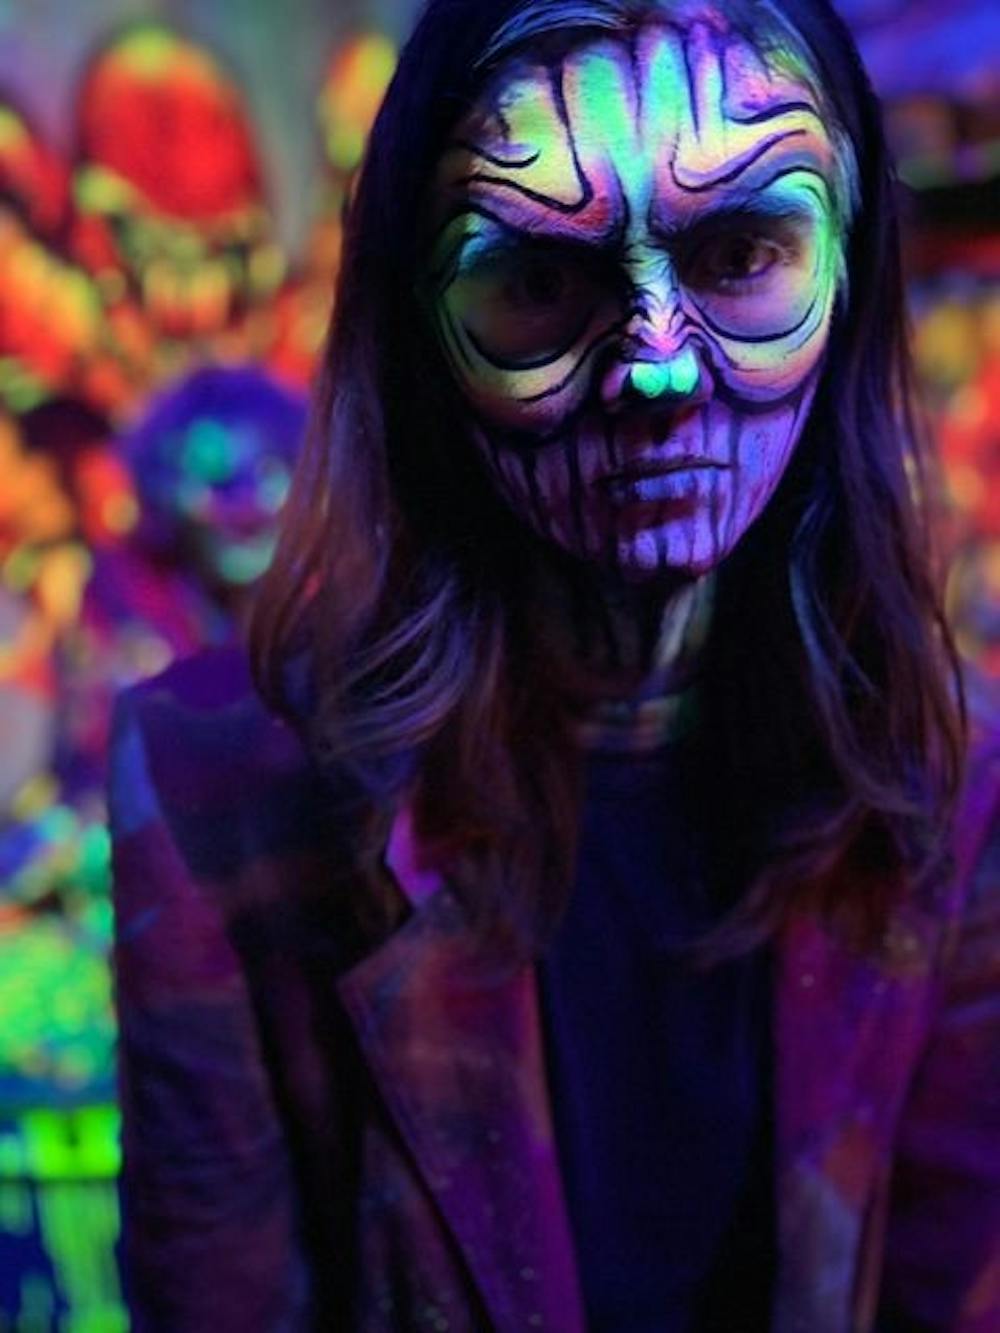 An actor with makeup and special effects poses in the haunted house during the 2022 run of the Halloween attraction. Upon completion actors get into character and mentally prepare themselves to become their character and provide the best experience for the guests.